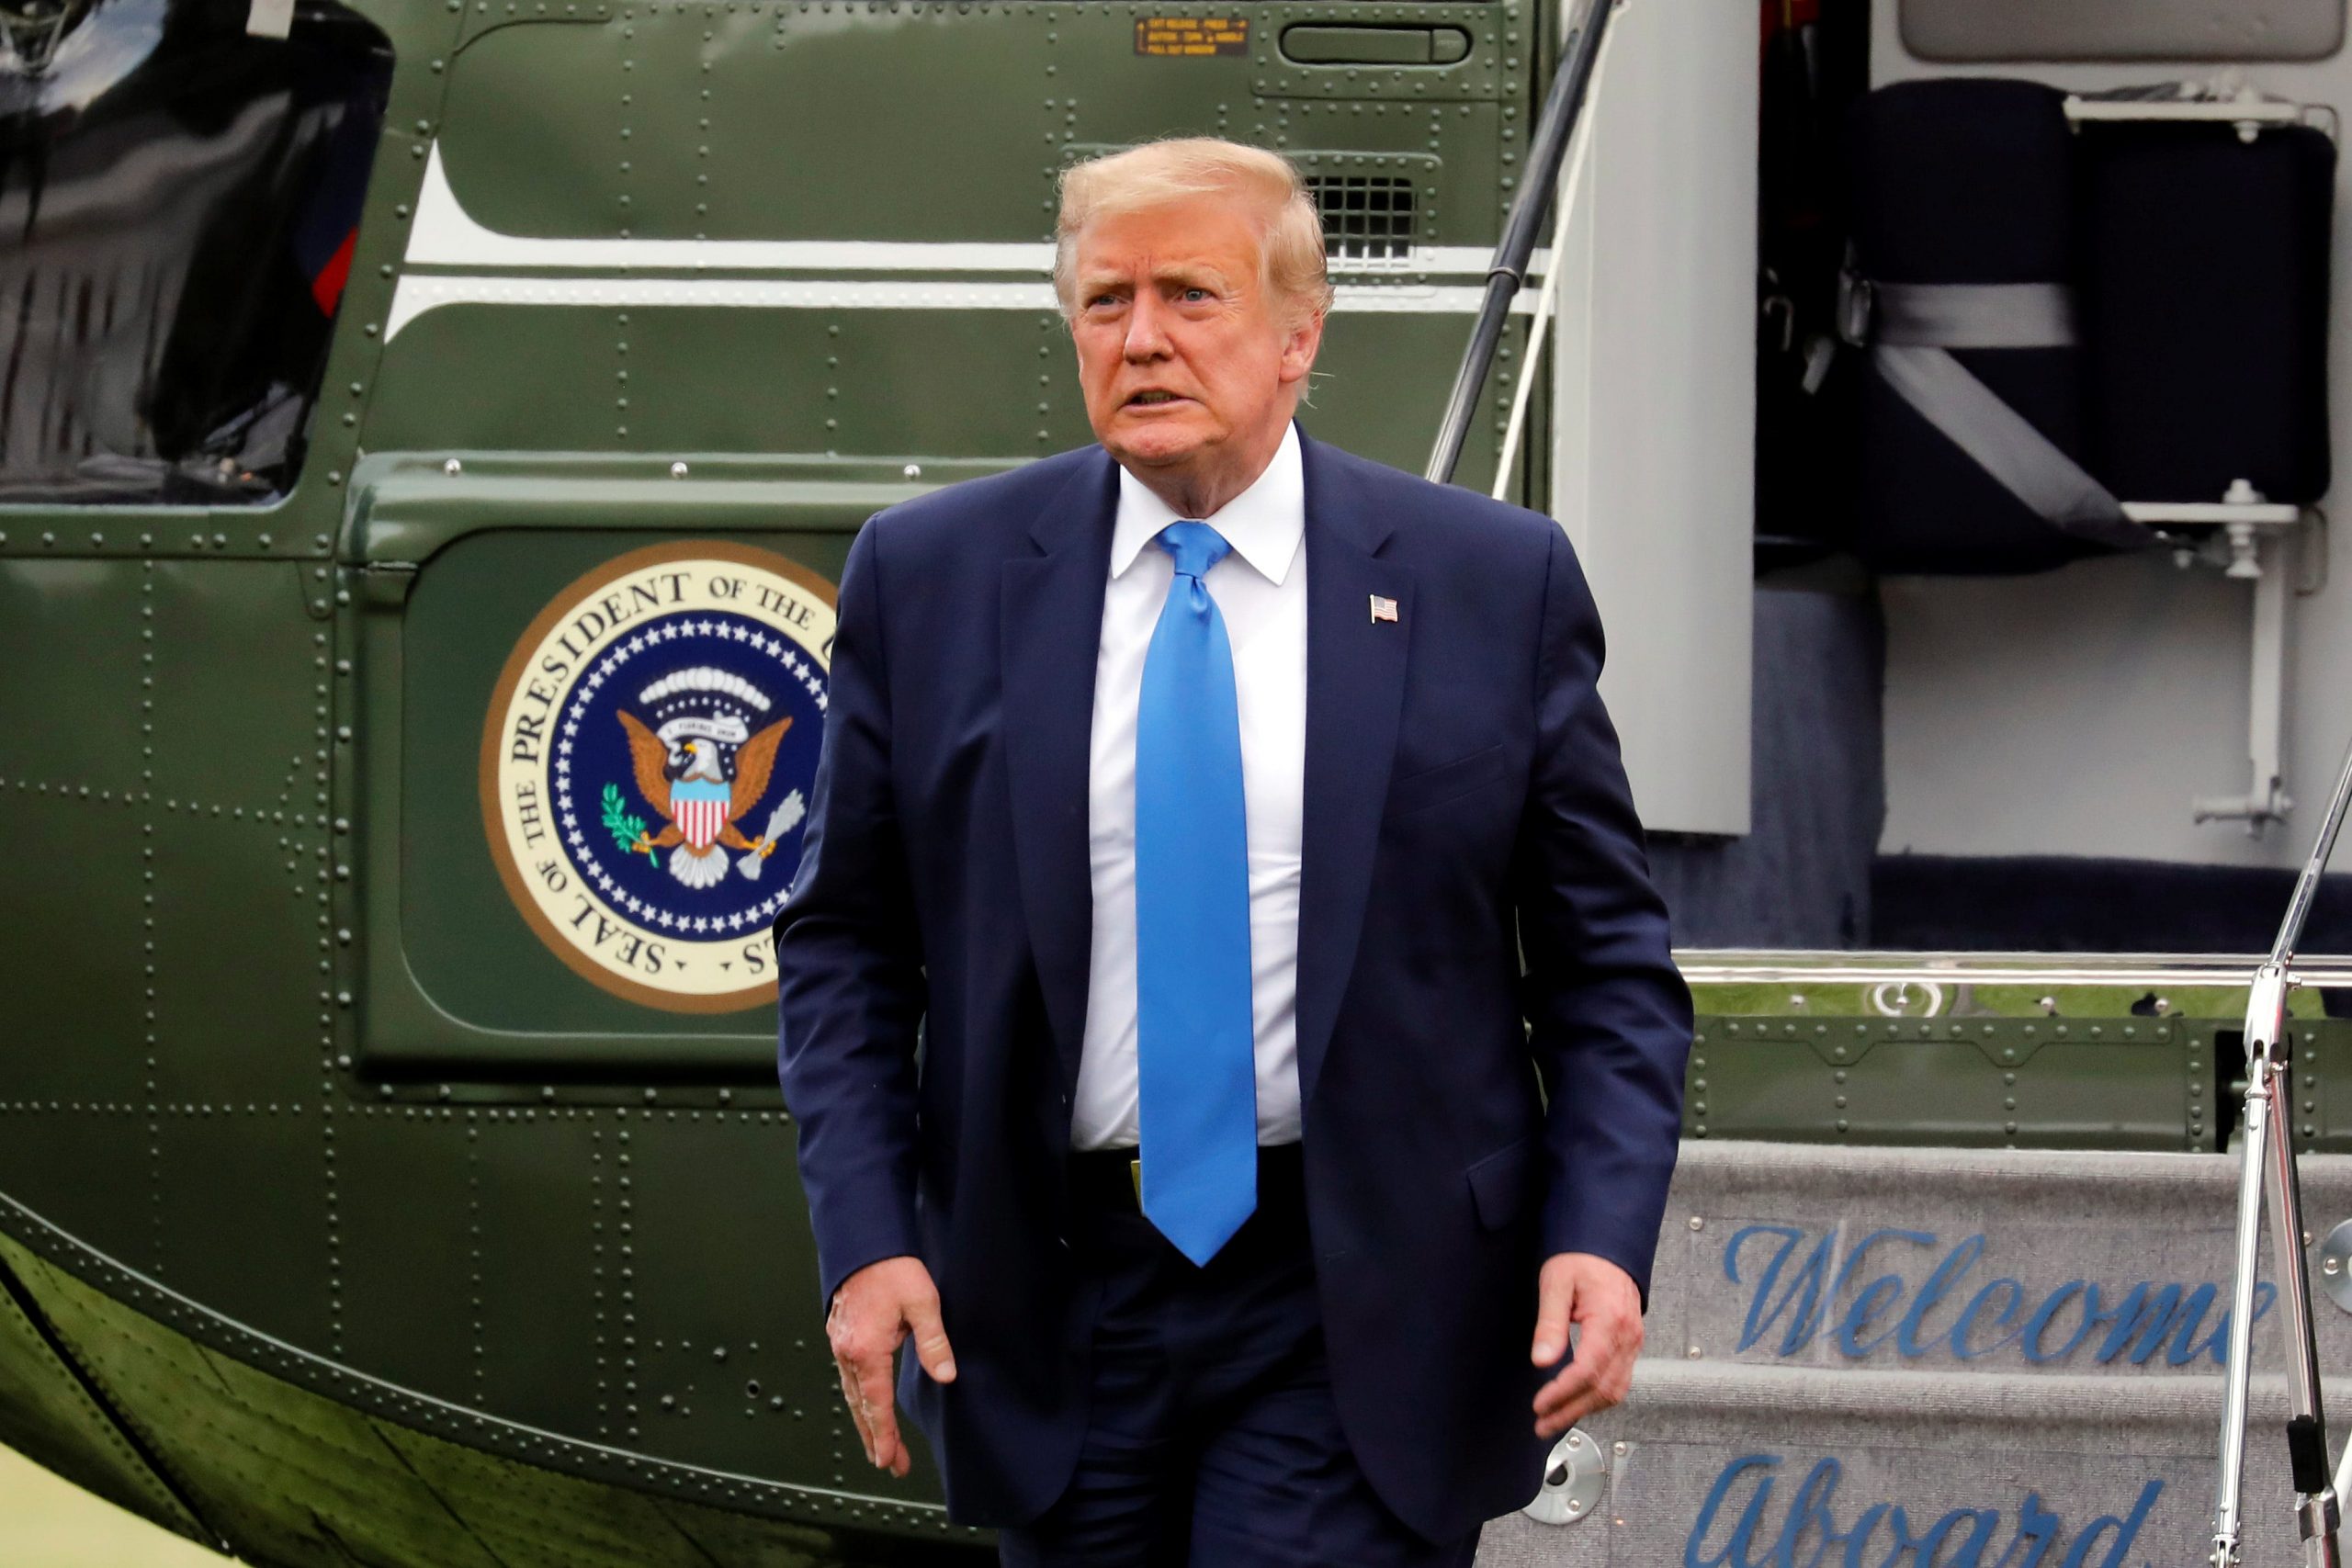 FILE PHOTO - U.S. President Donald Trump arrives on the South Lawn of the White House in Washington, U.S., from the Walter Reed National Military Medical Center, July 11, 2020. REUTERS/Yuri Gripas